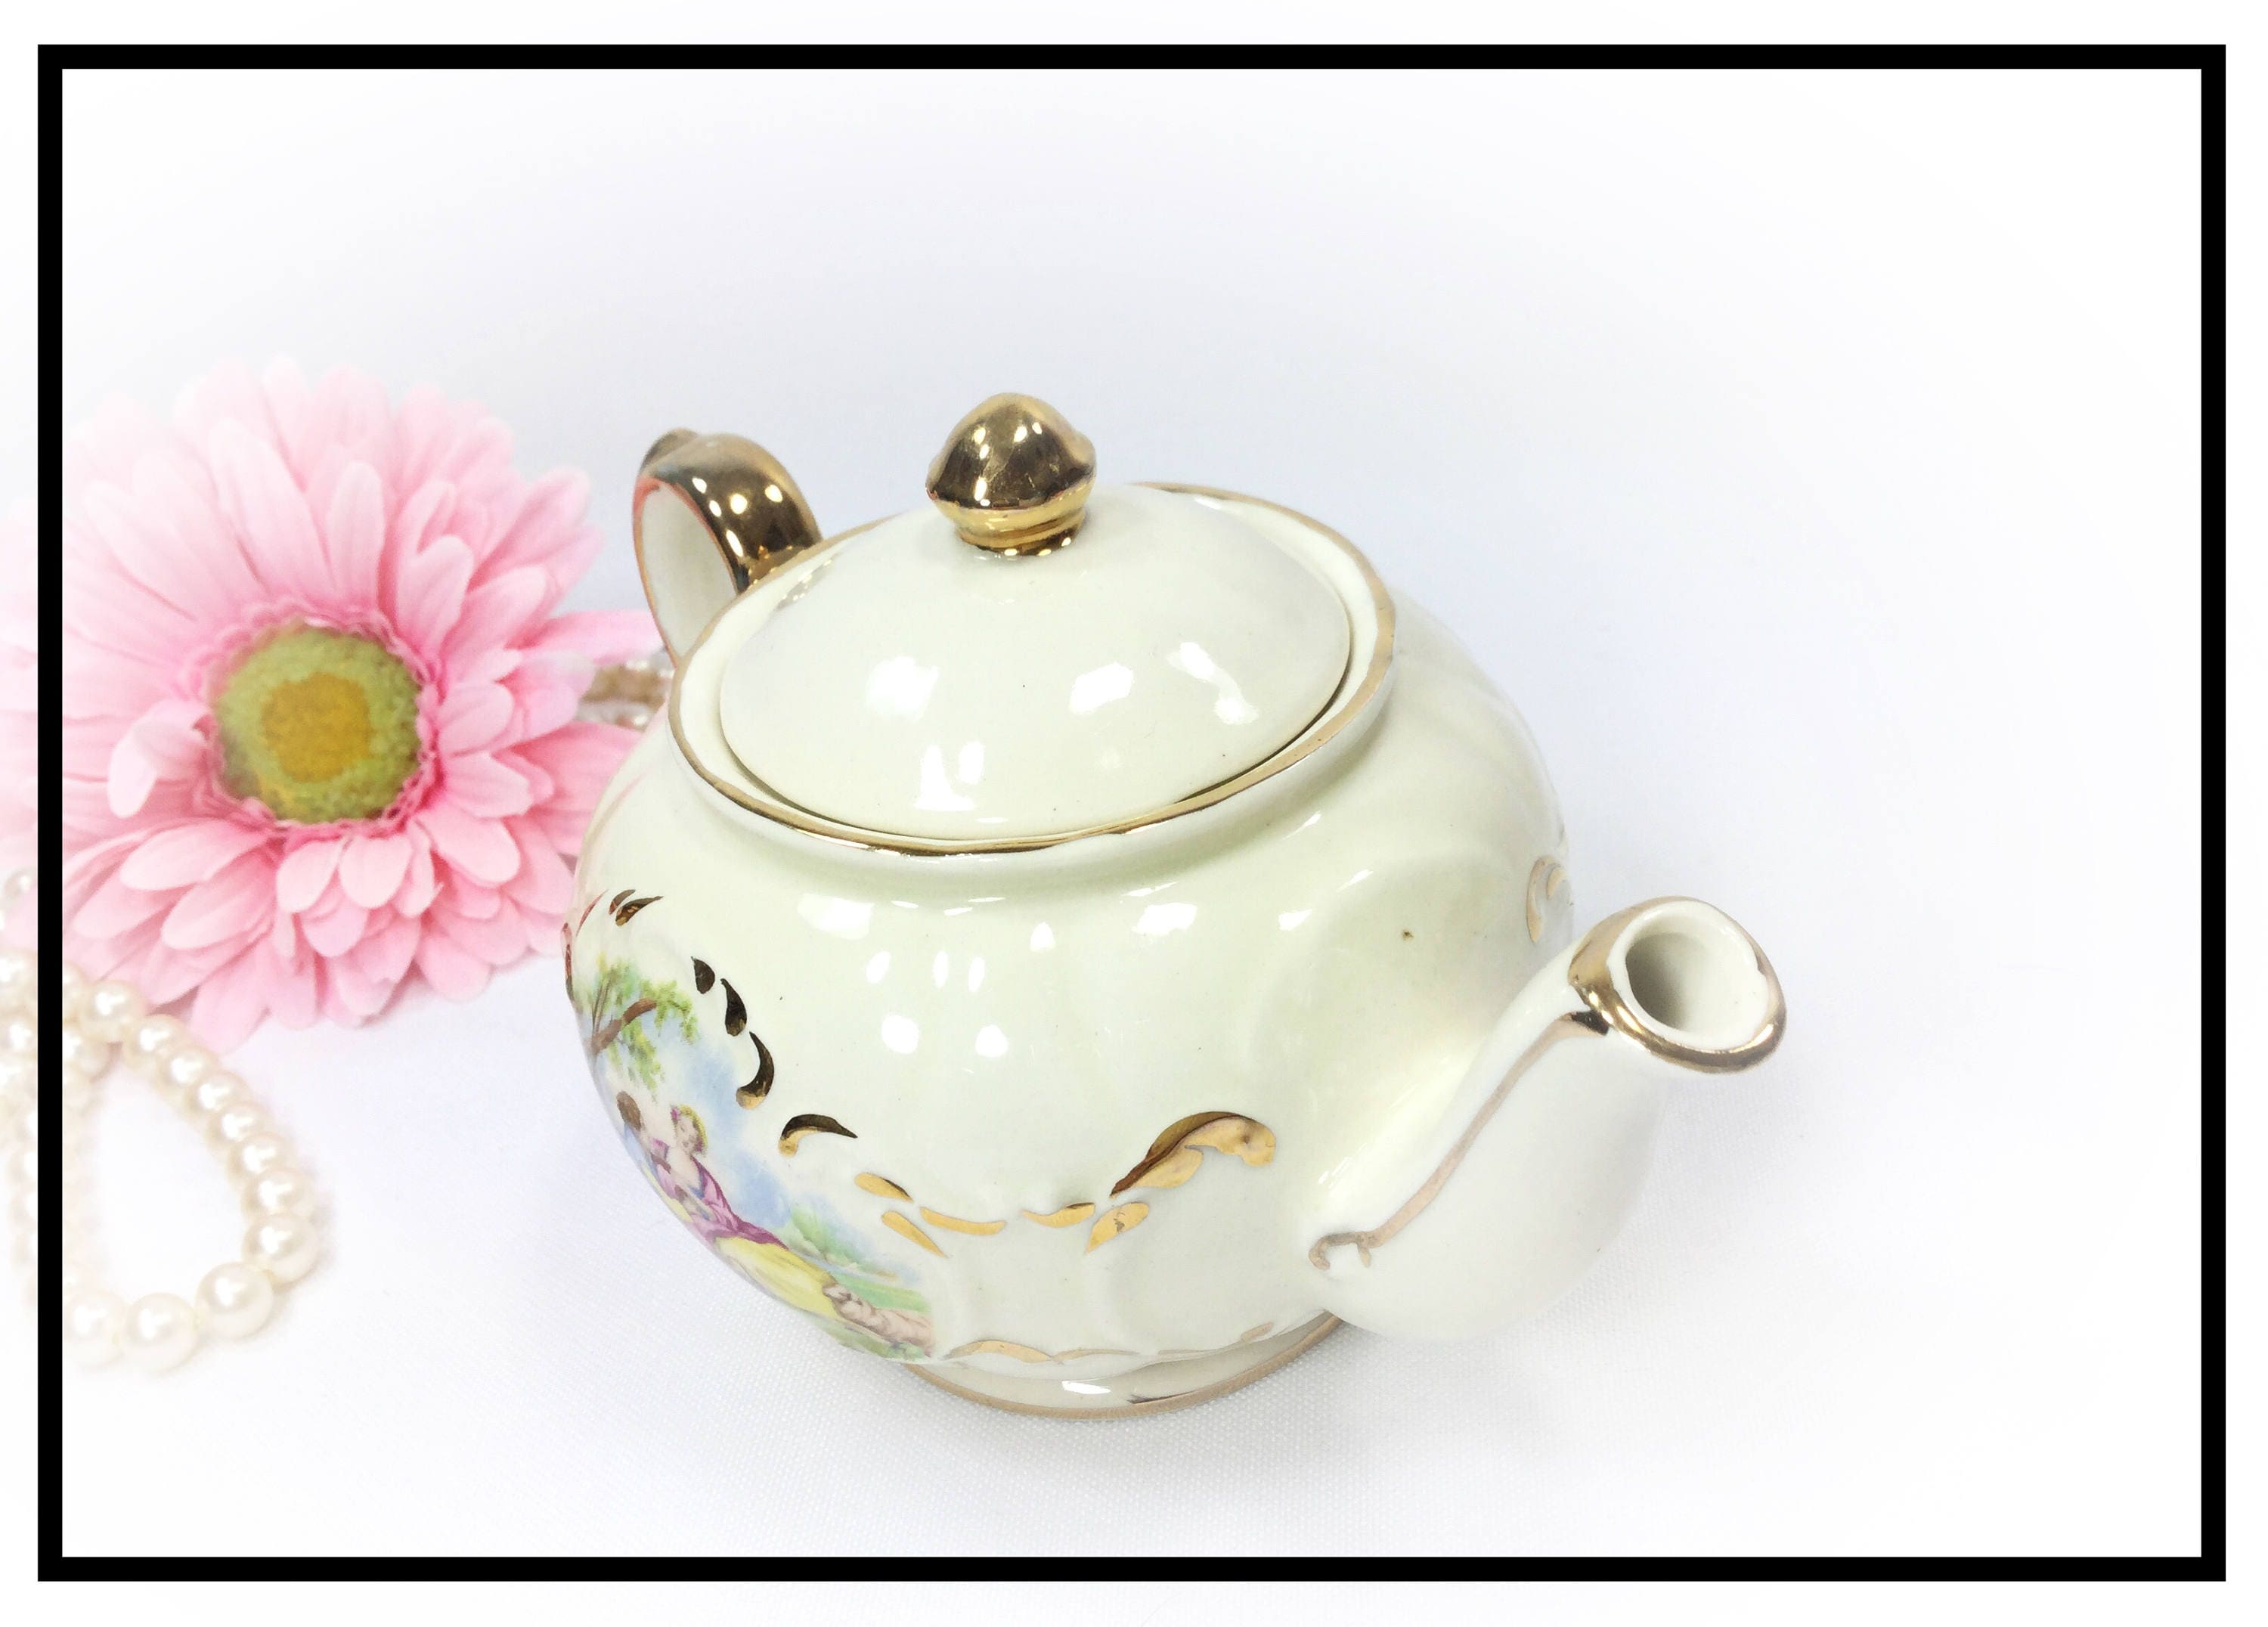 Classic Framing & TrophyLink - The teapot with attitude! Part of our new  giftware range just in time for Mother's Day.